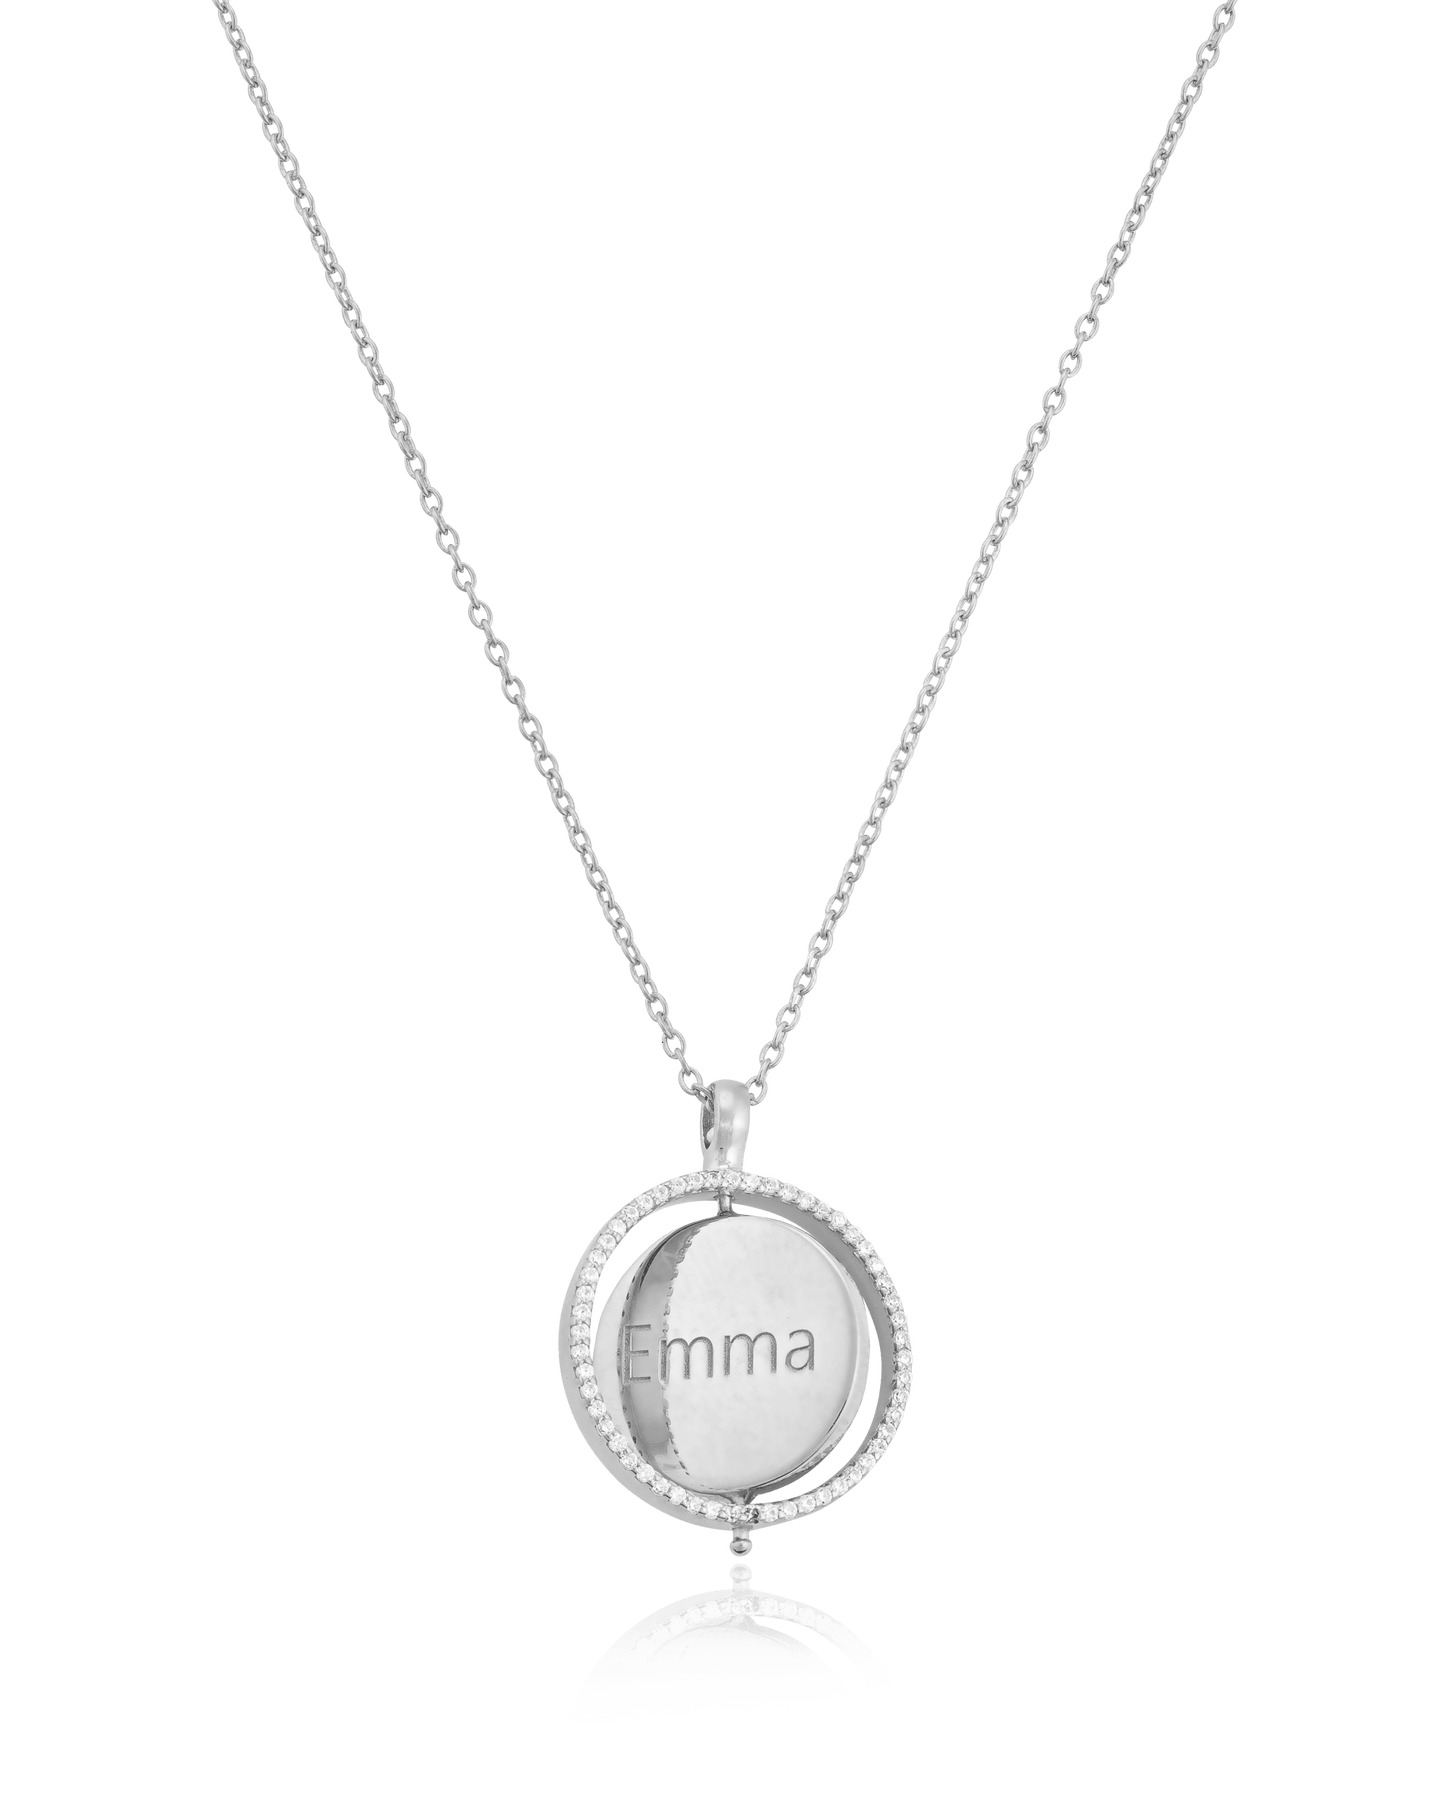 Saturn Ring Necklace - 925 Sterling Silver Necklaces magal-dev 